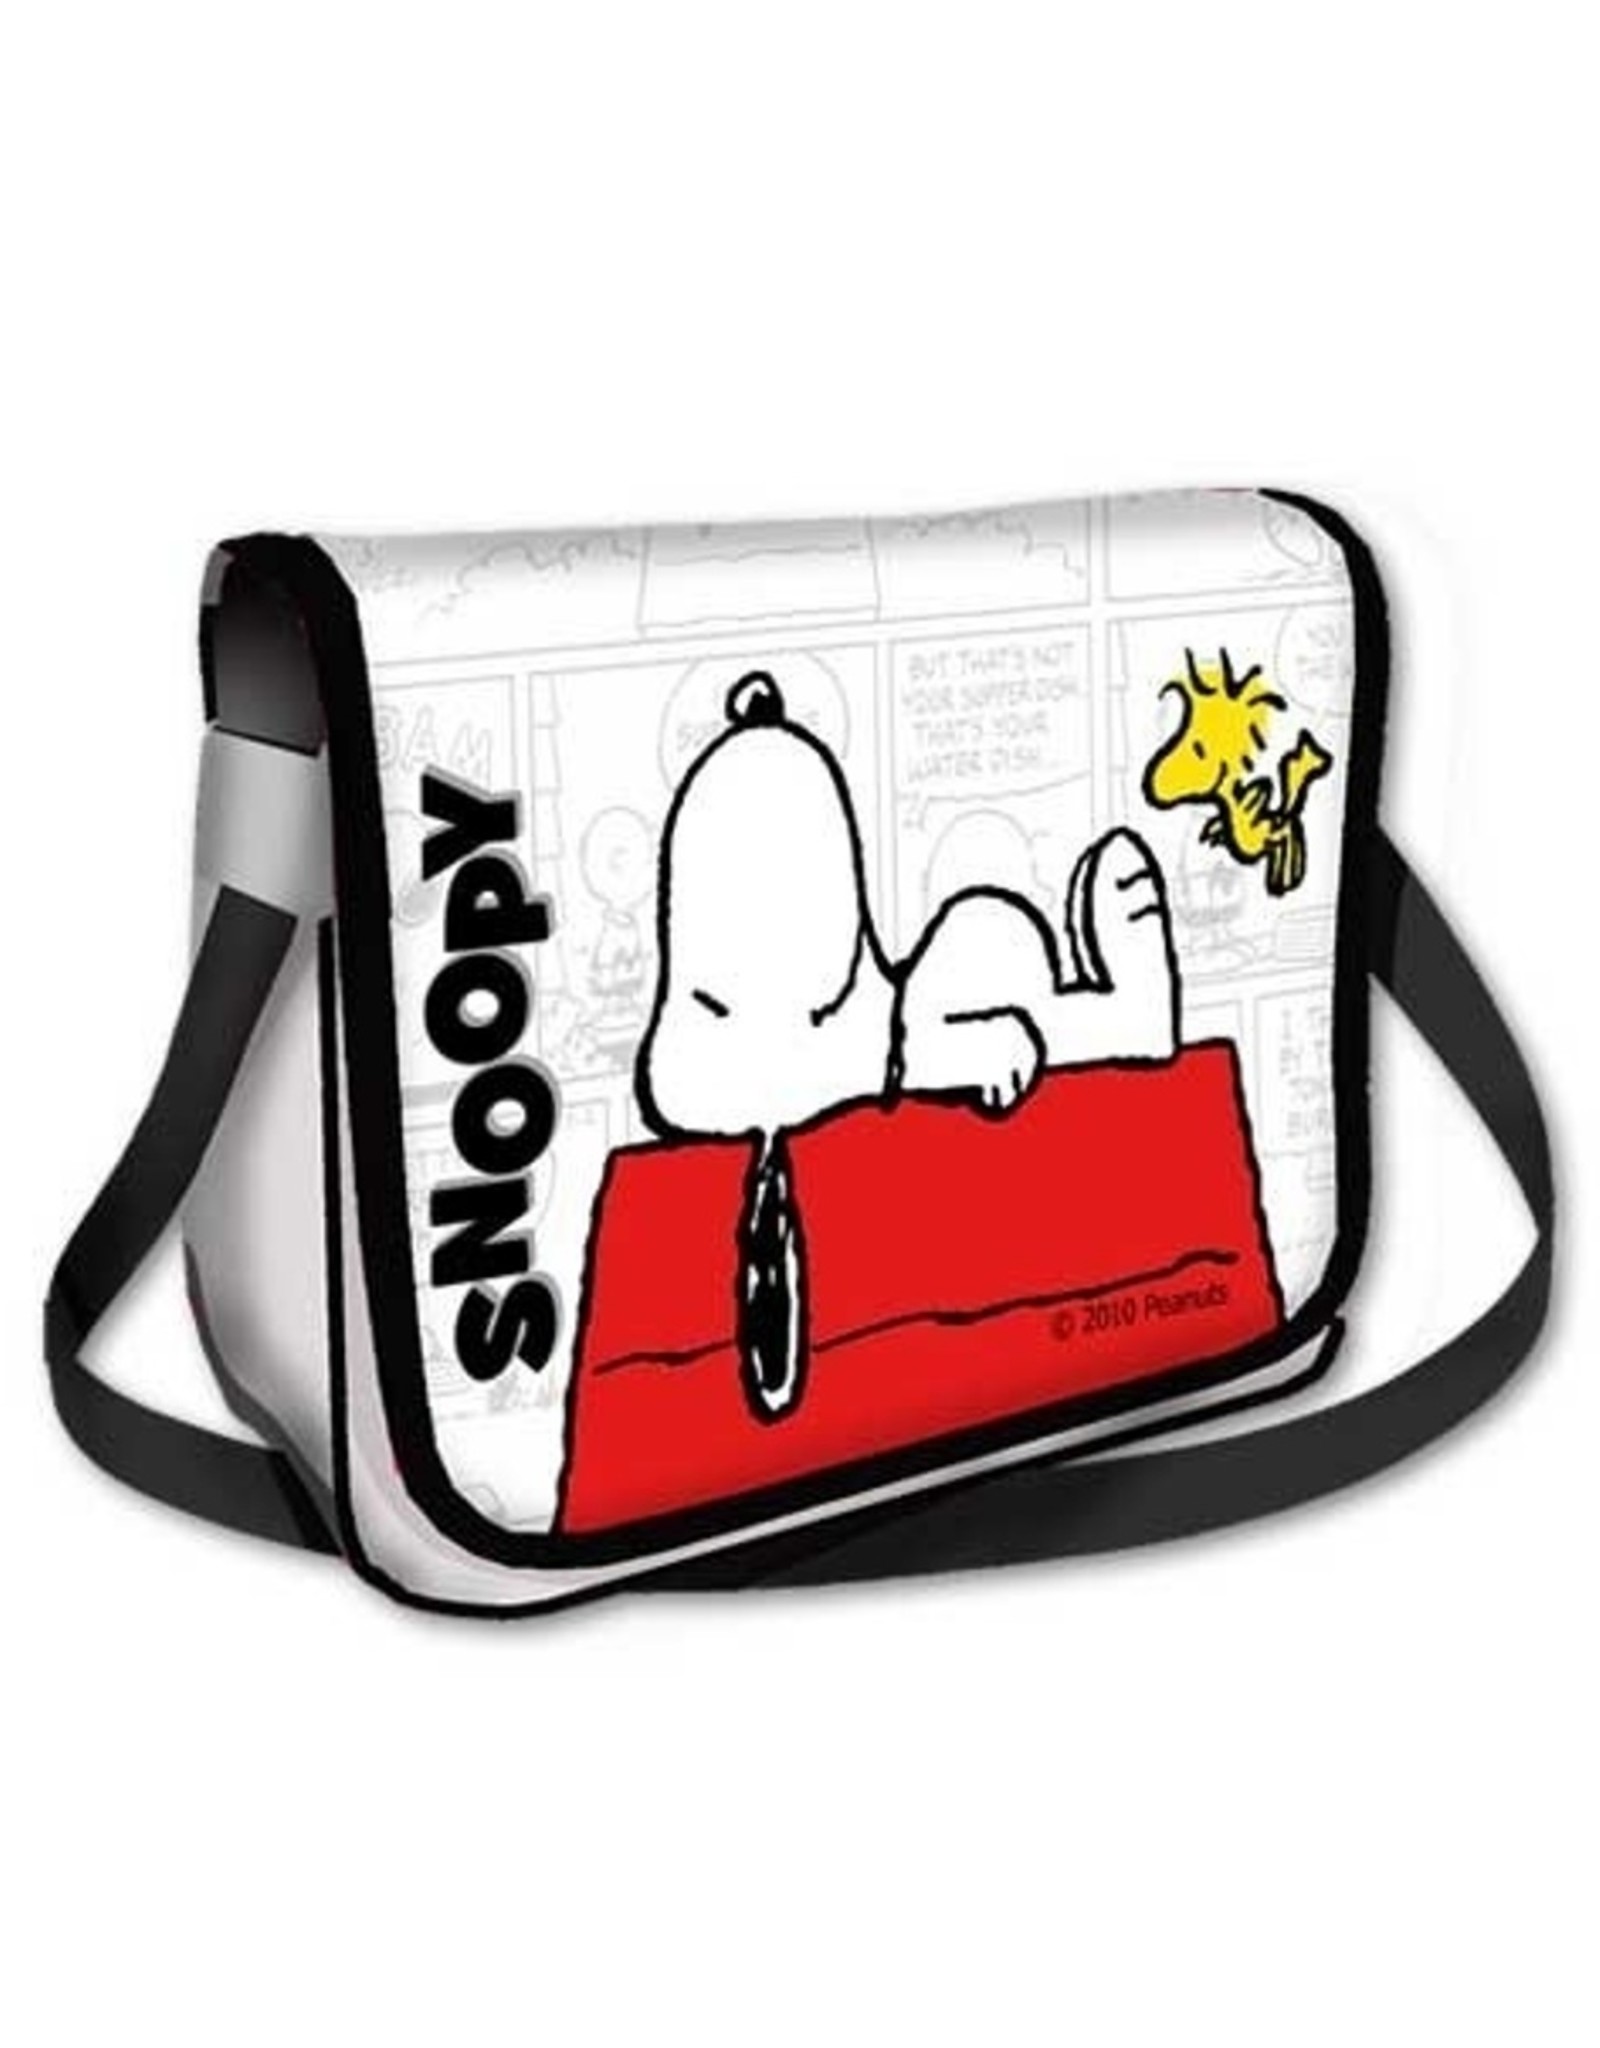 Snoopy and Charlie Canvas Woven Cotton Tote Bag Utility Market Handy  Everyday - Etsy